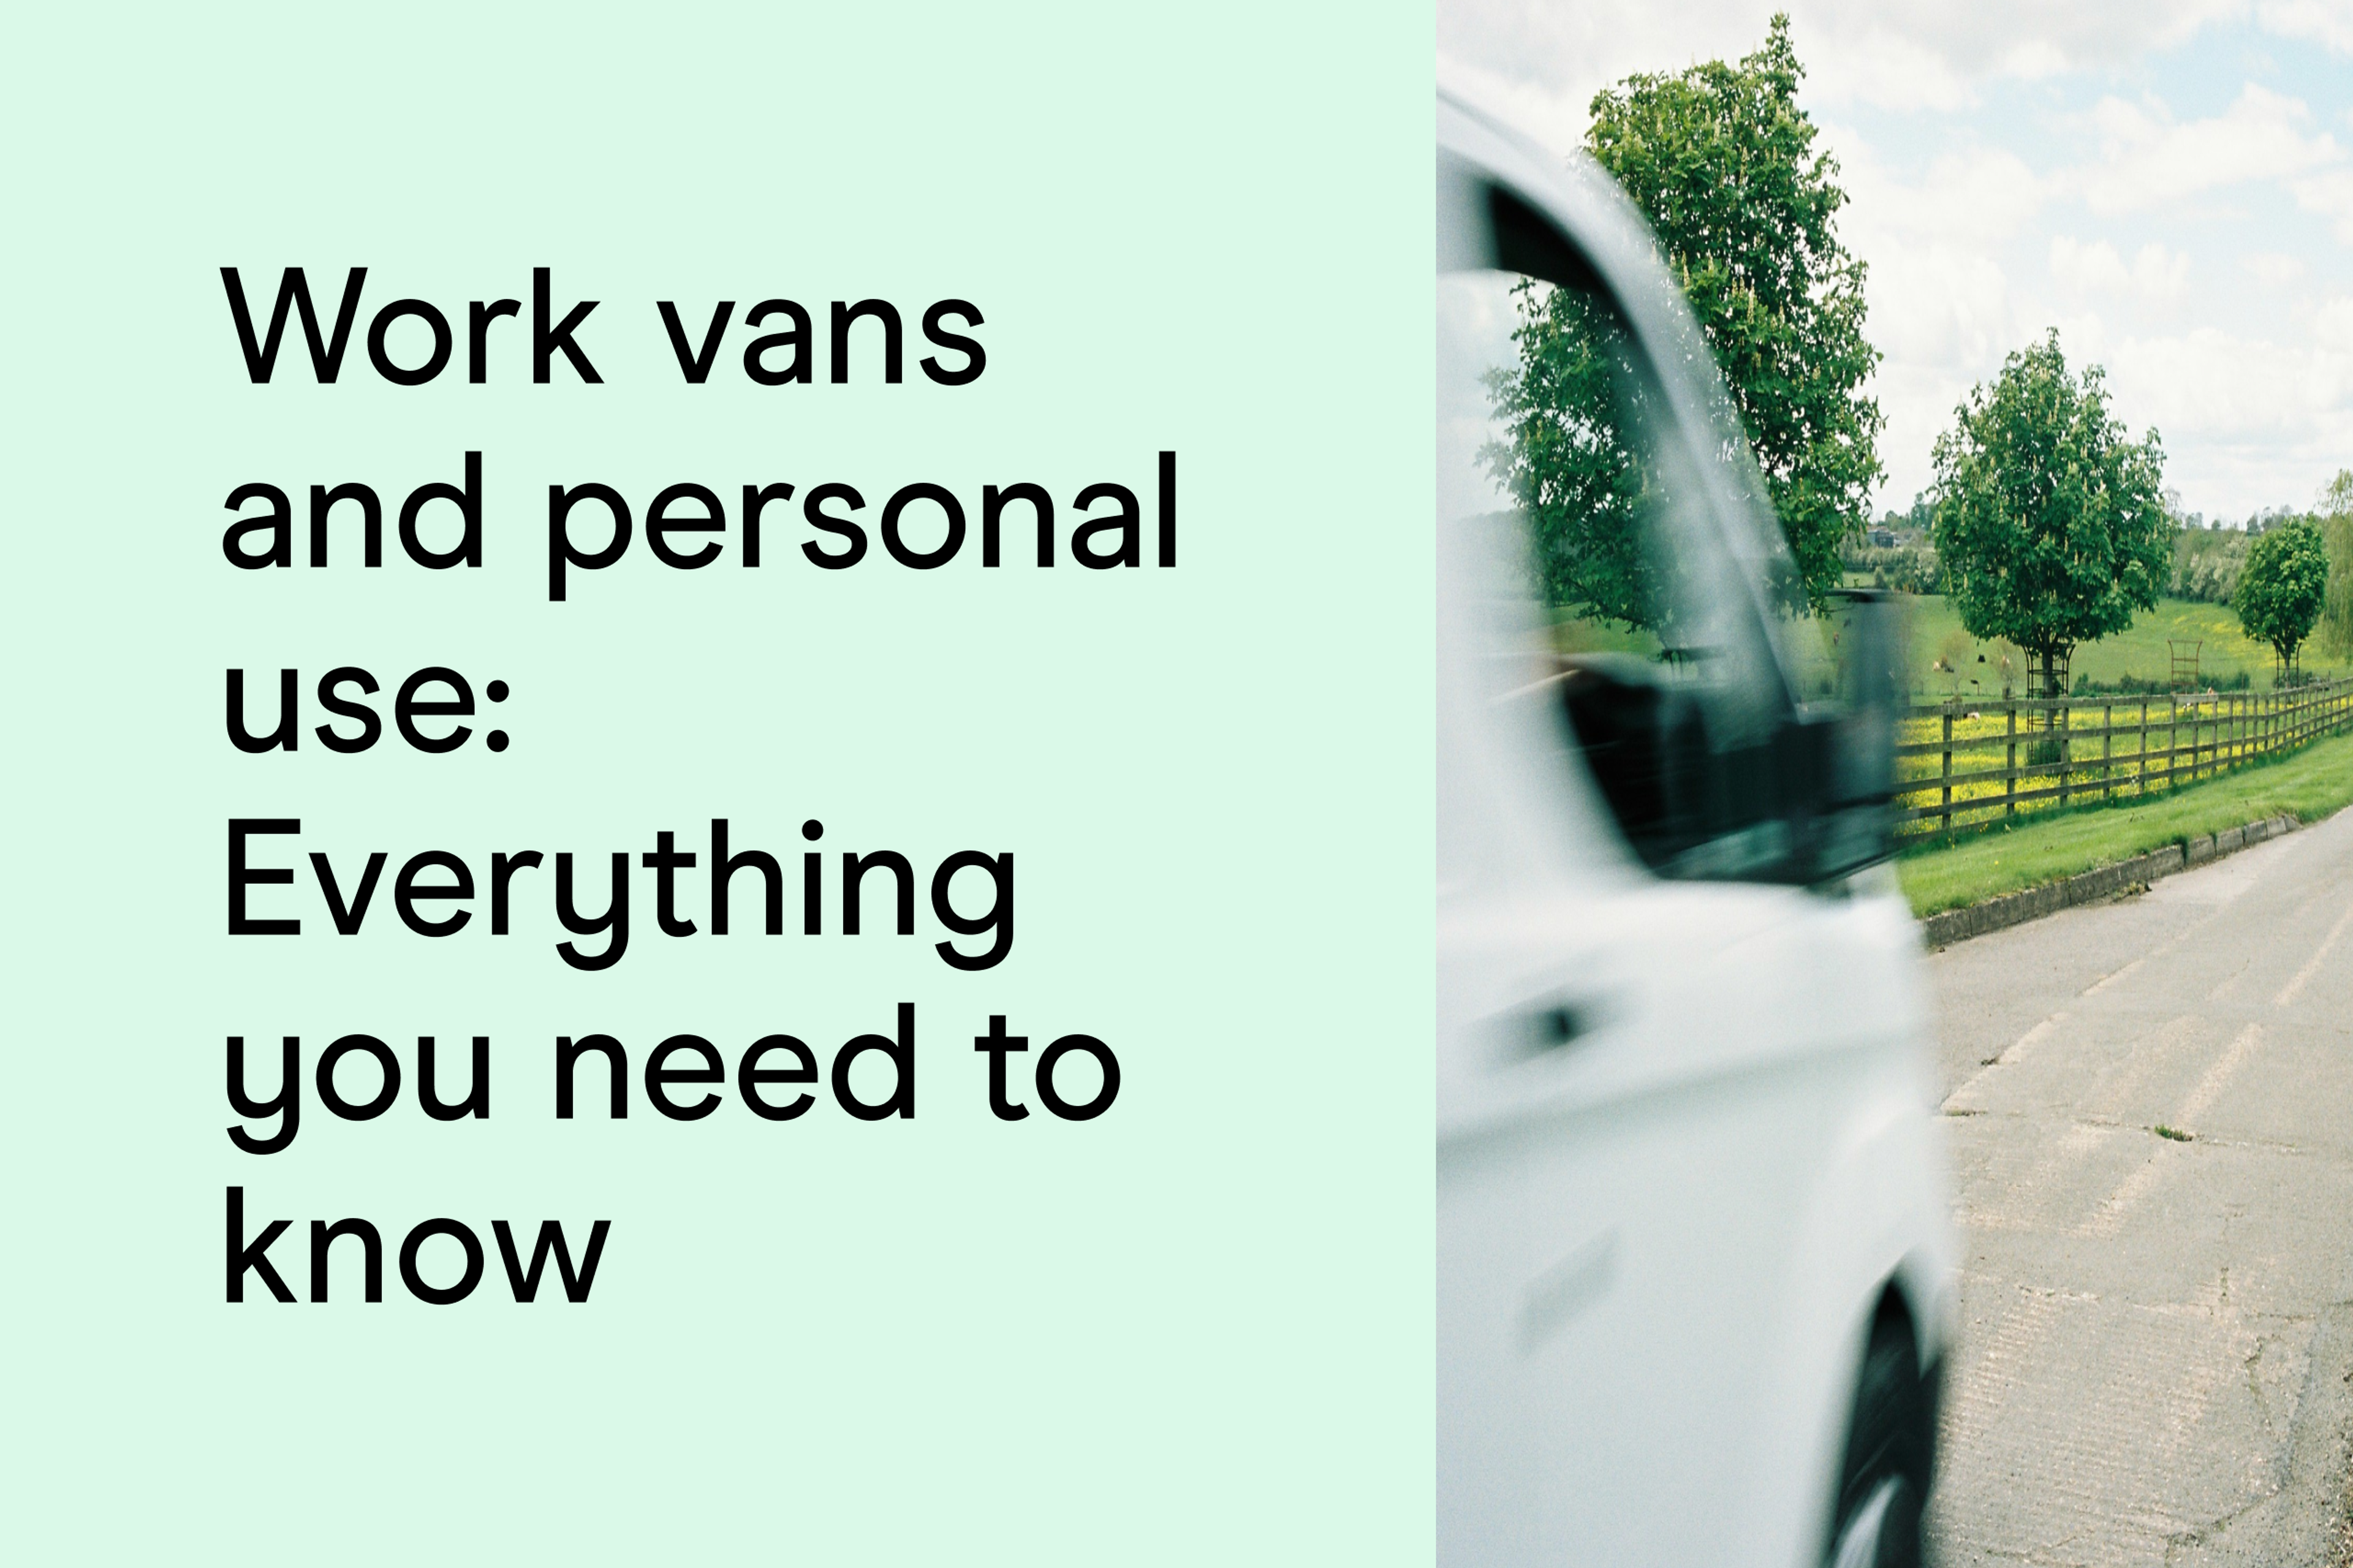 Work vans and personal use: Everything you need to know